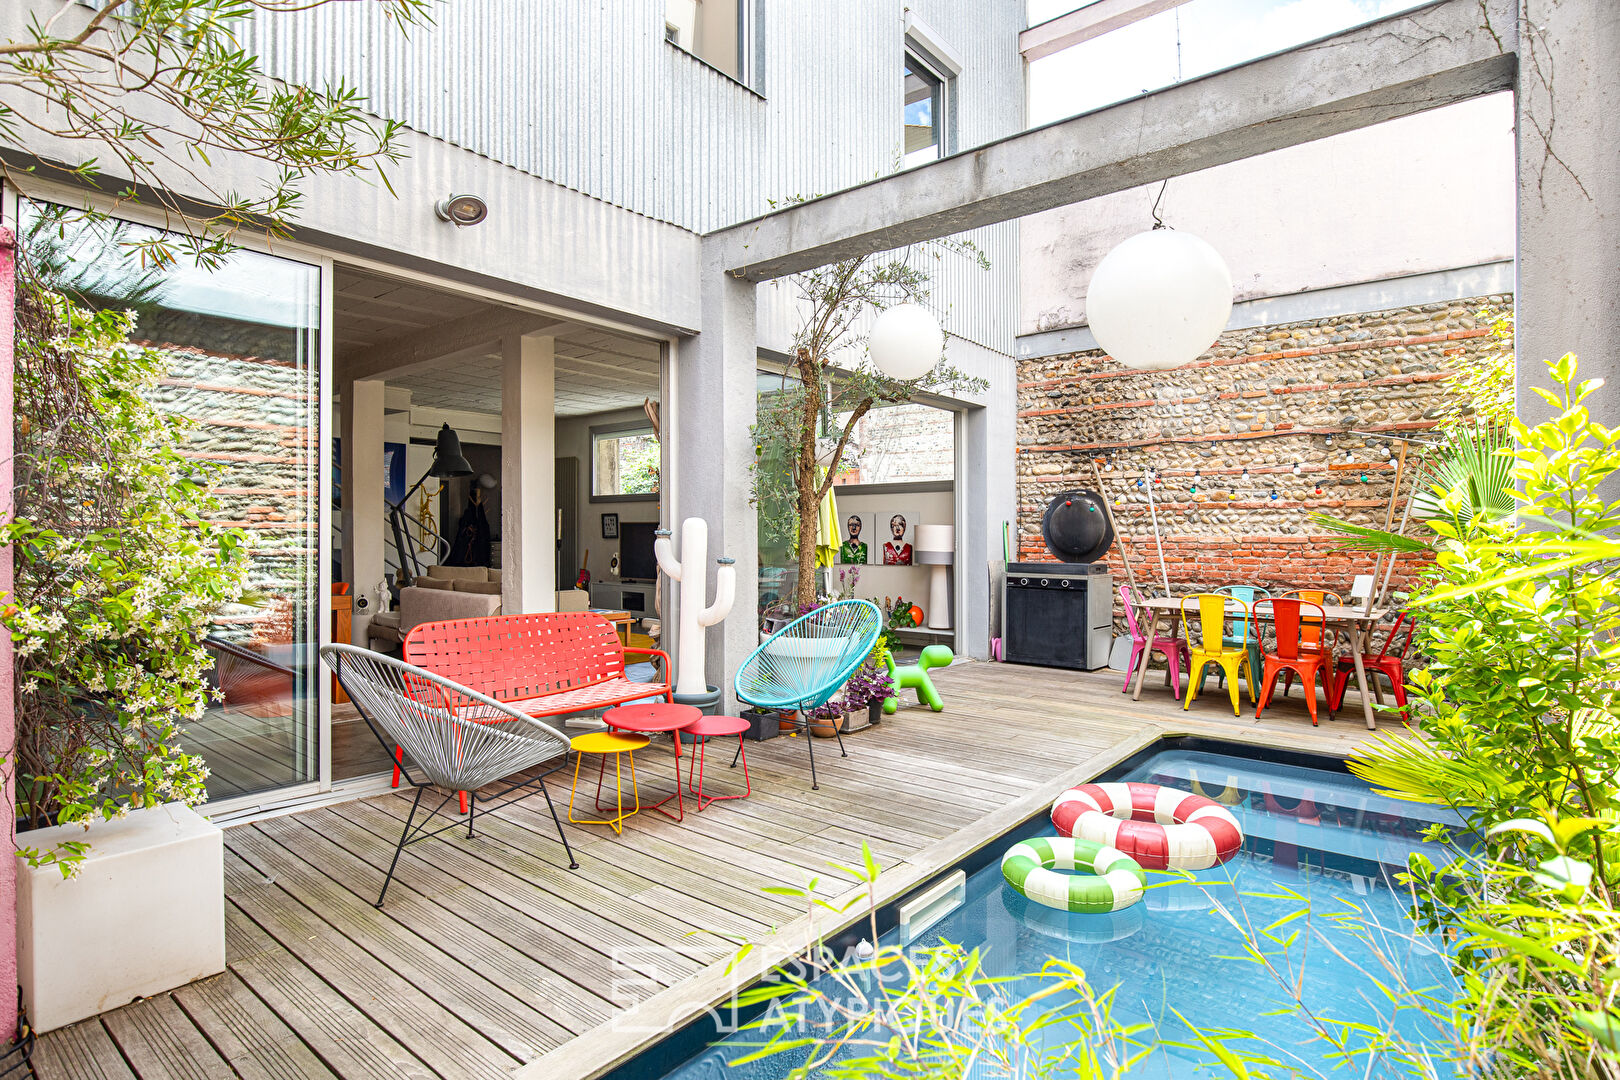 Workshop rehabilitated into a house with swimming pool in Toulouse